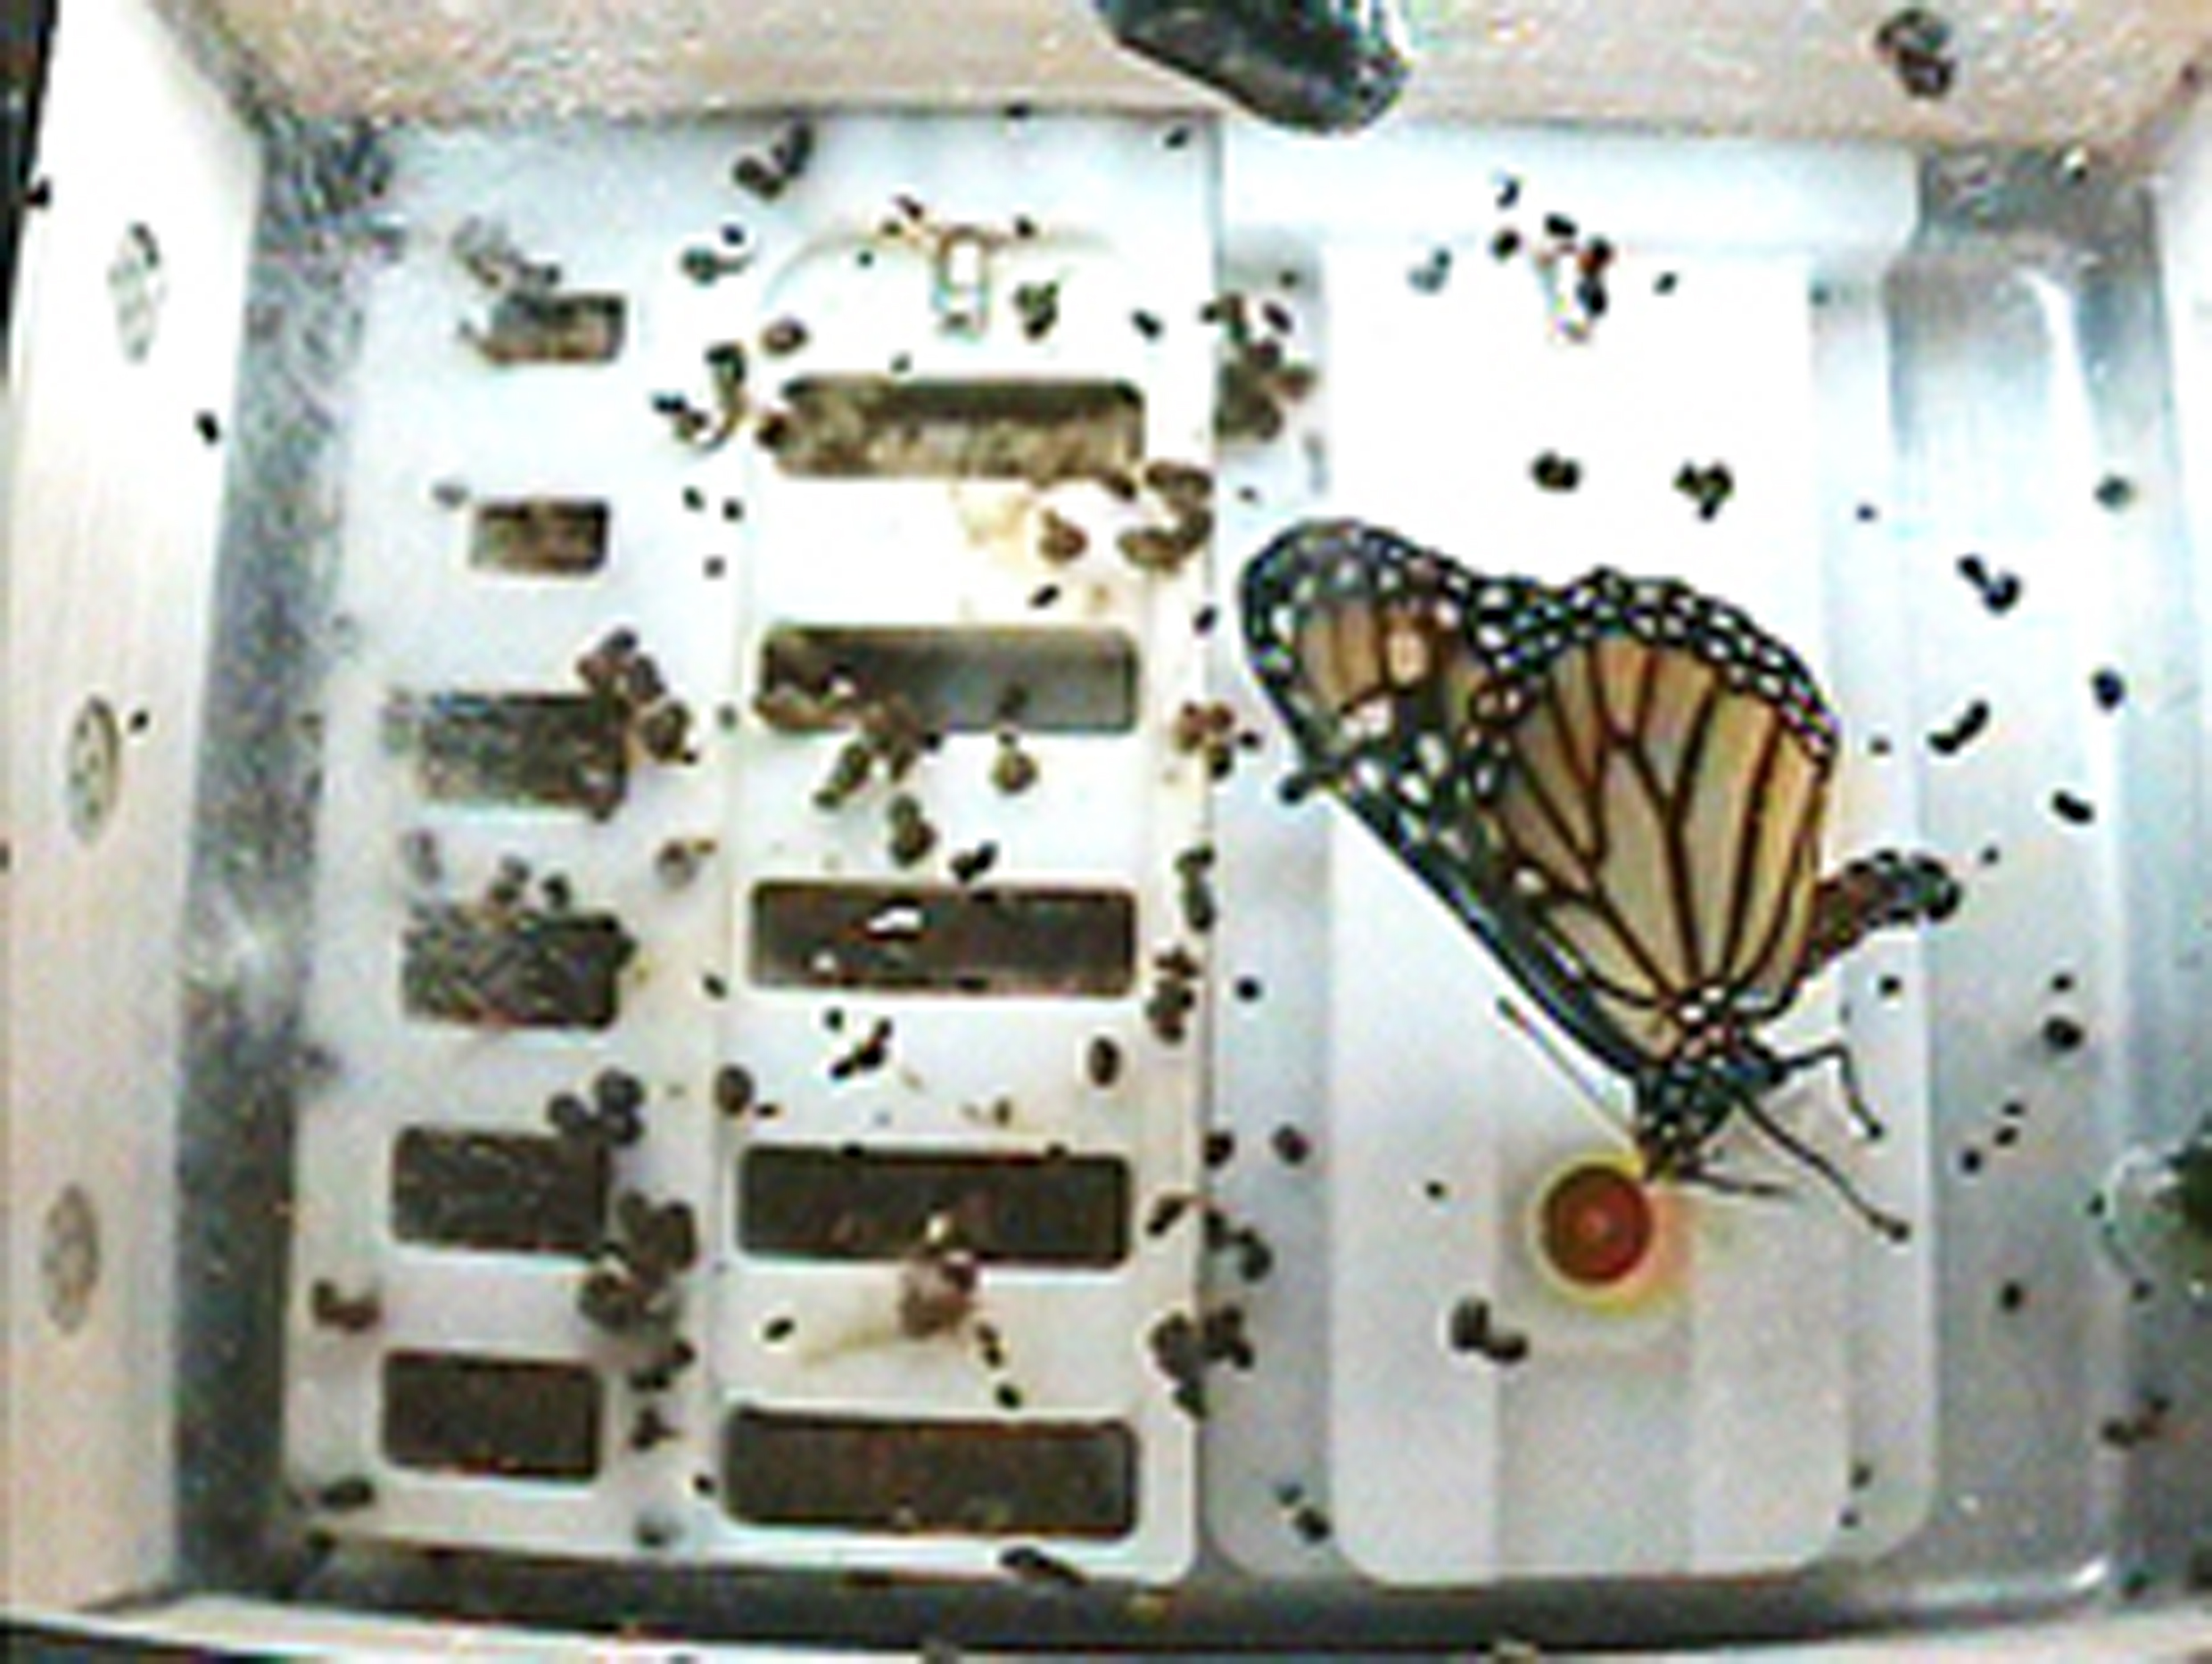 After completing its pupa stage, a Monarch butterfly emerges